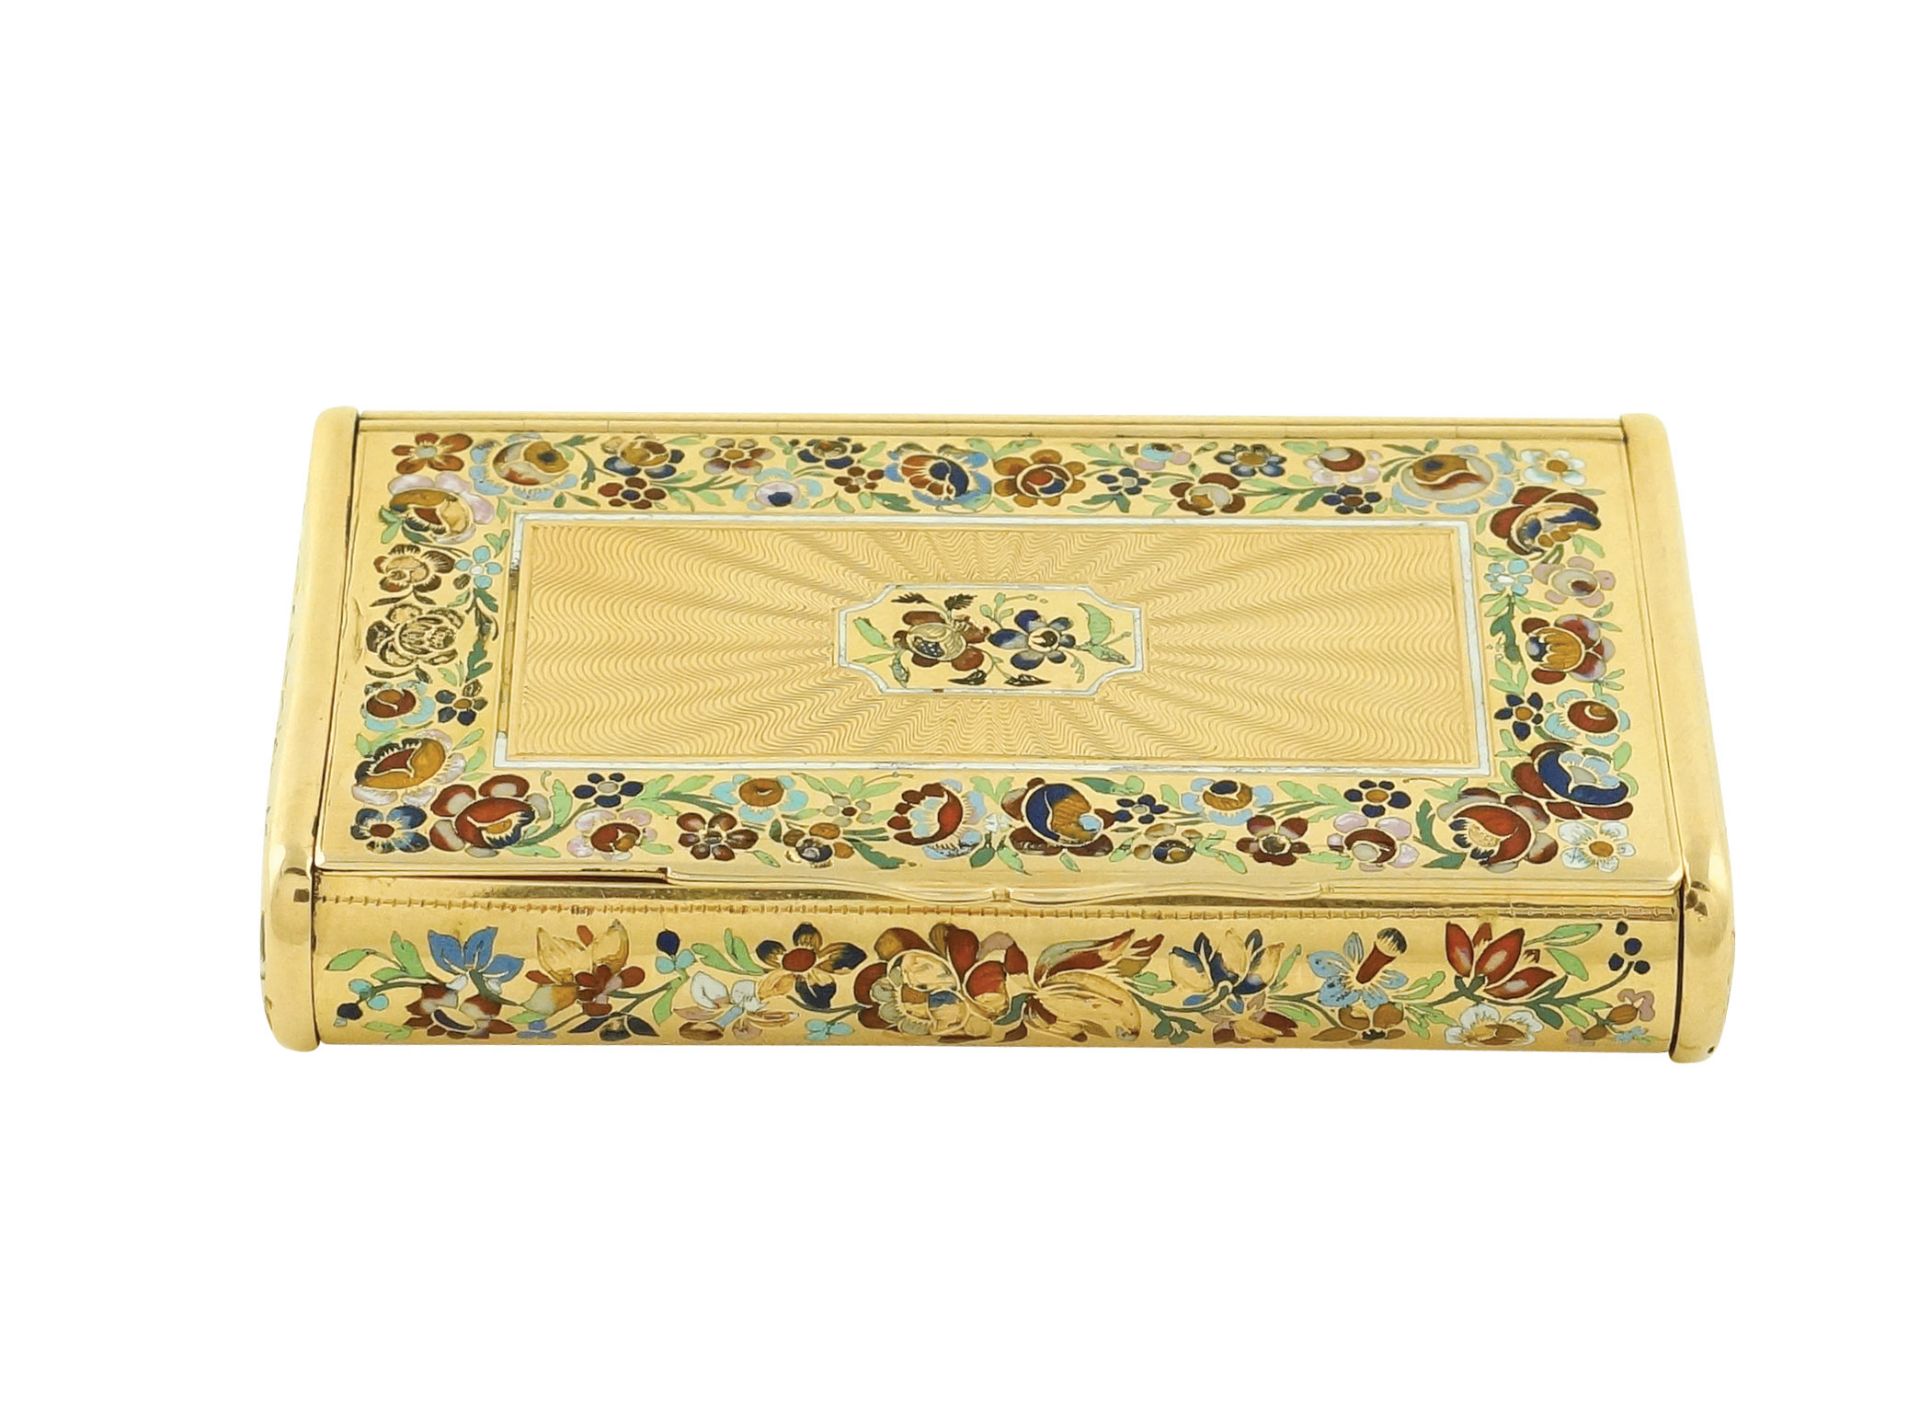 A gold and enamel snuff box